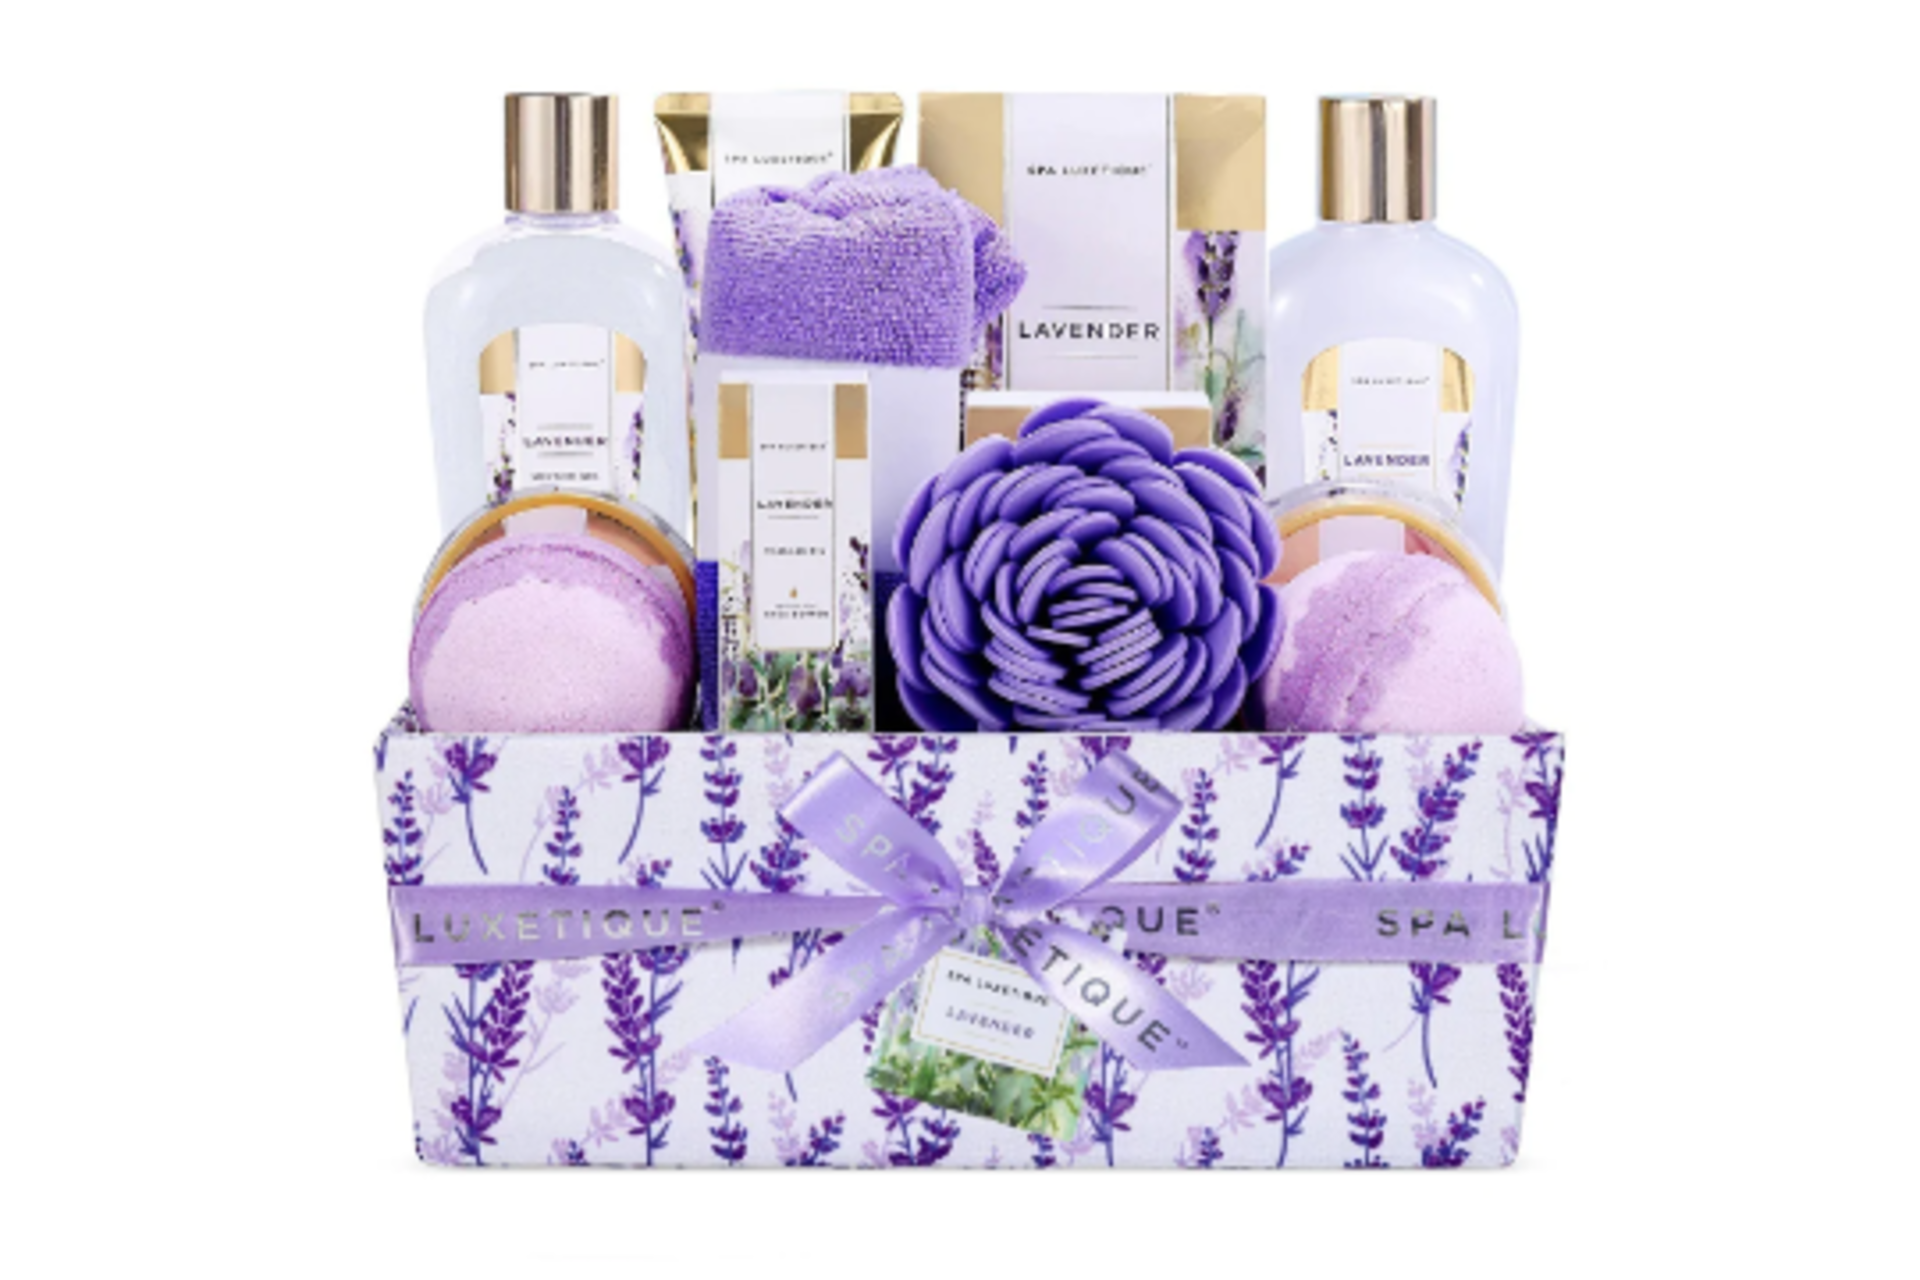 PALLET TO CONTAIN 36 X NEW PACKAGED 12 Piece Lavender Bath & Shower Gift Basket. (SKU:SPA-3-LAV).